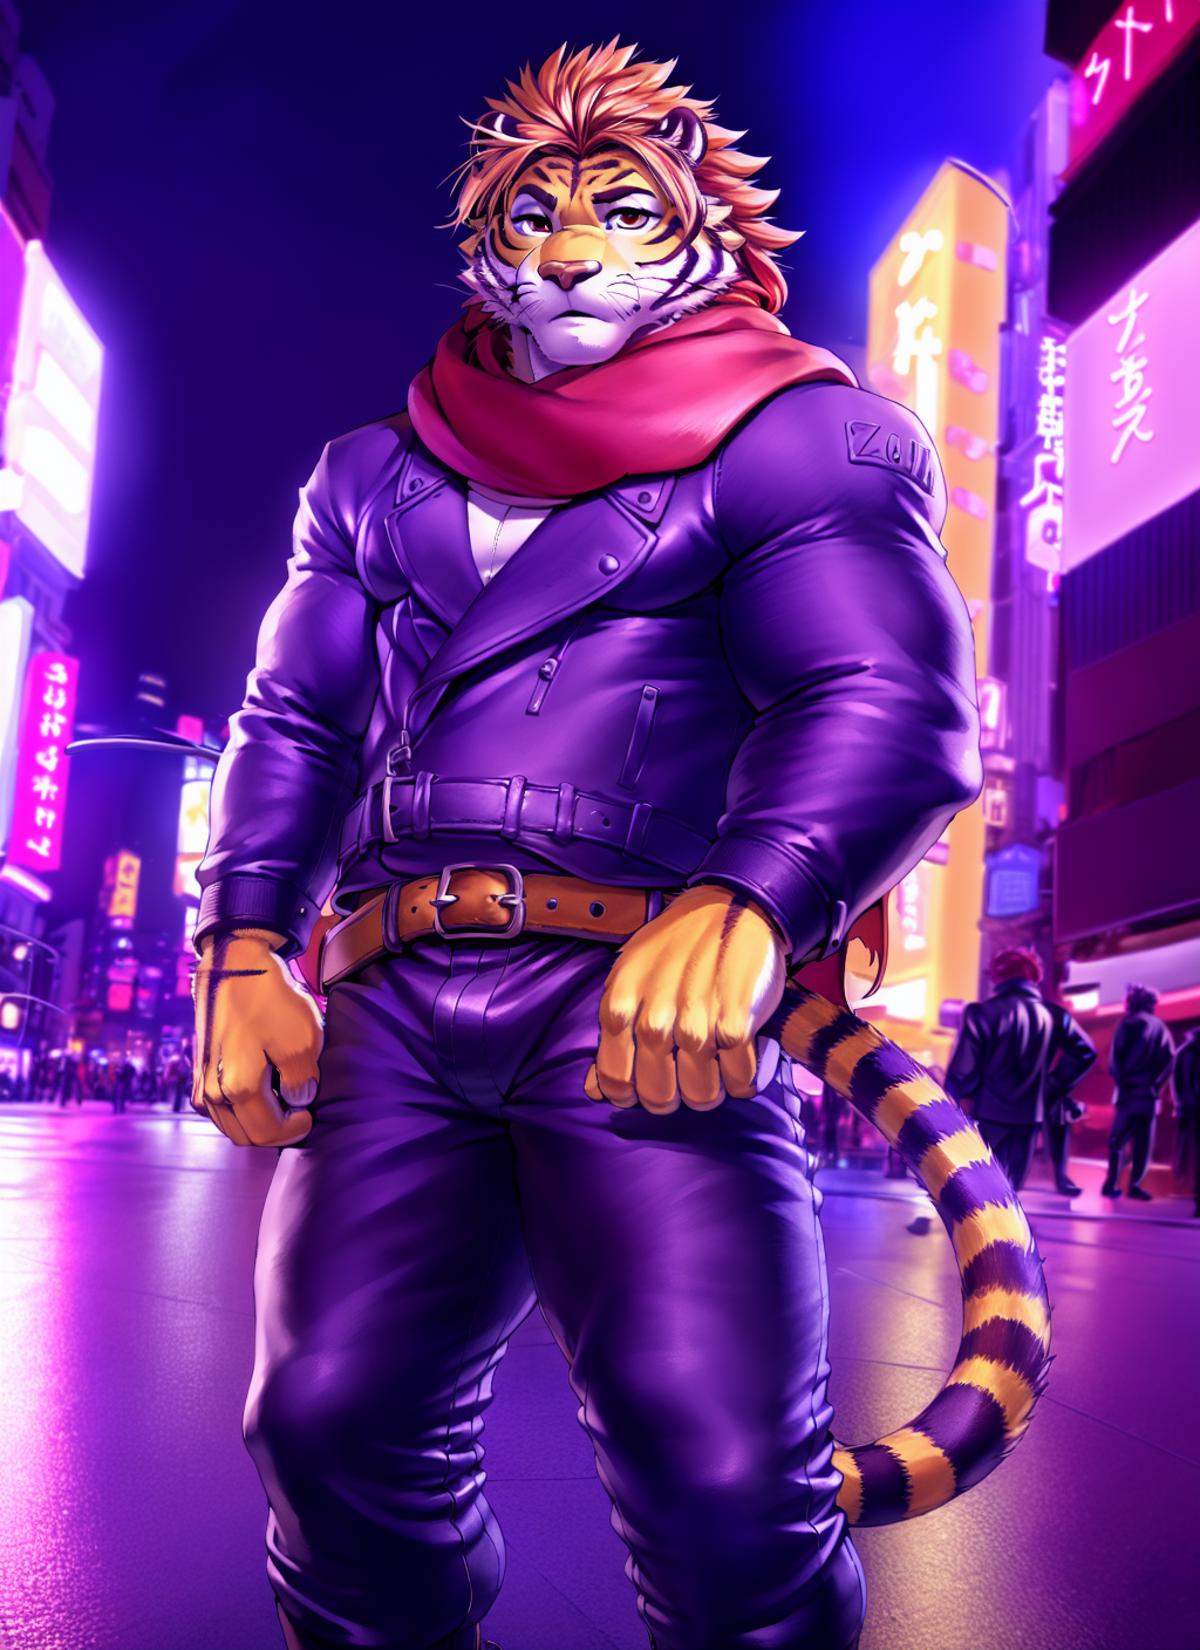 Nomad - Housamo / TAS image by Orion_12